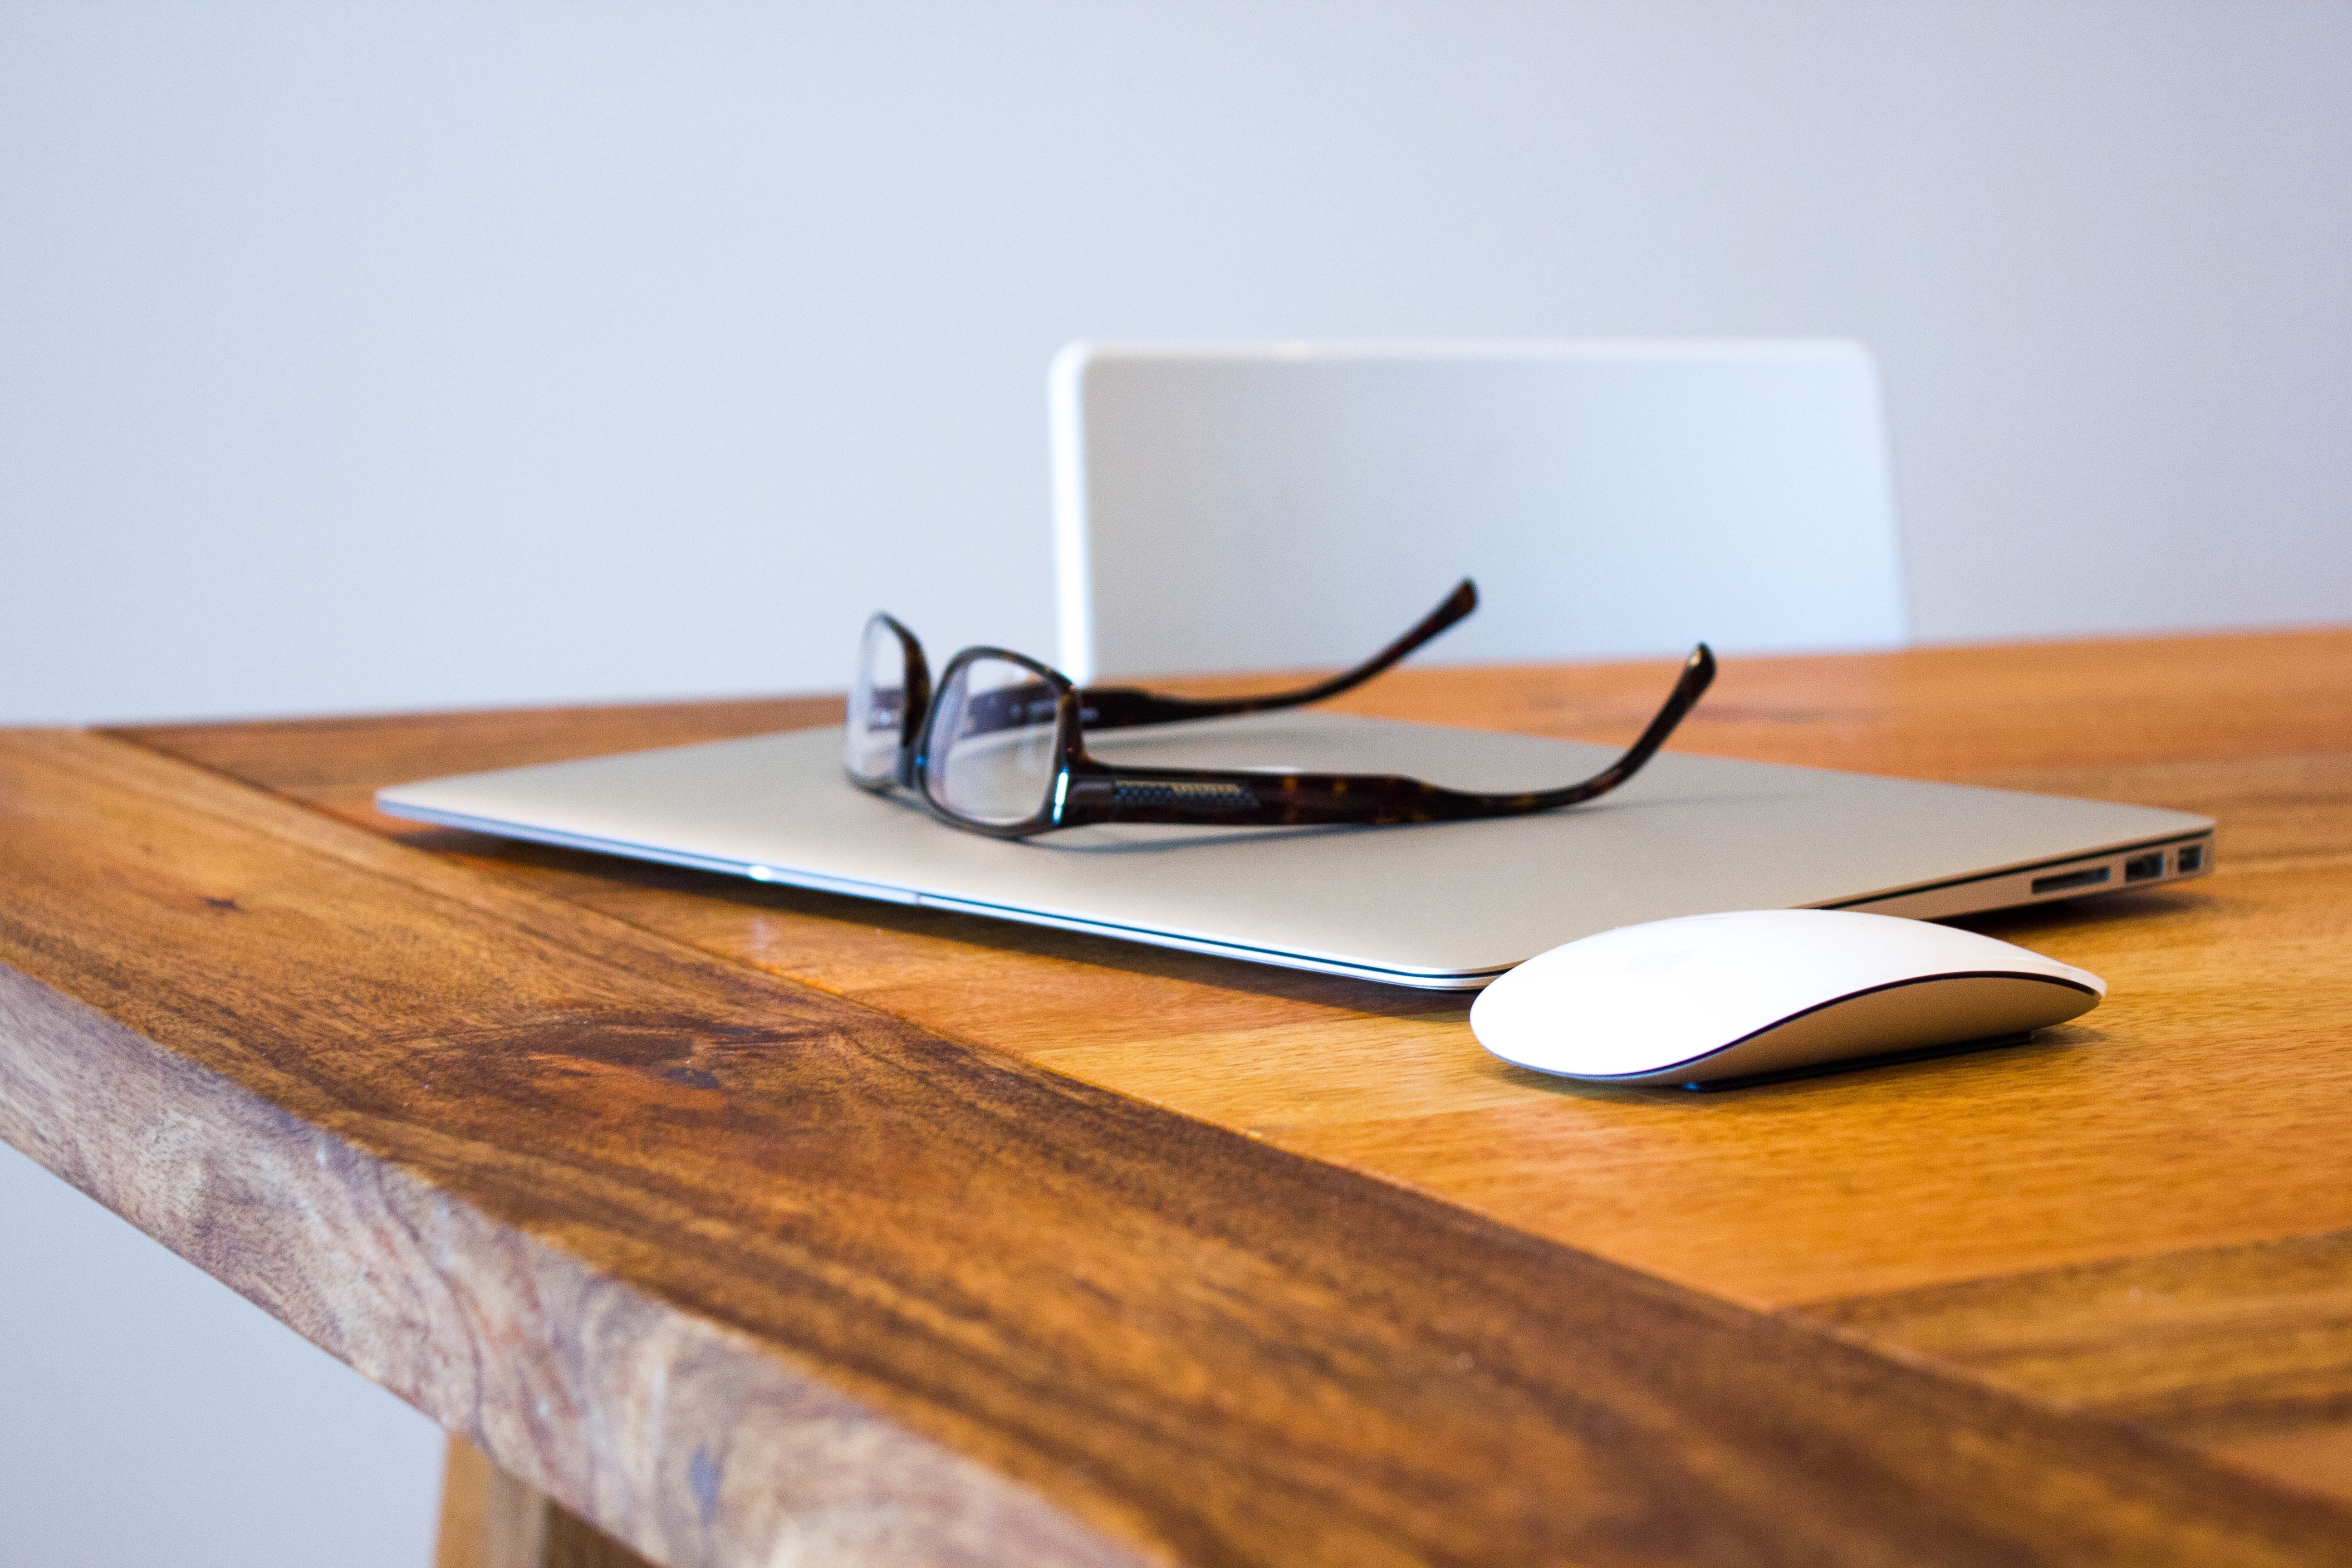 Laptop, glasses, and a slim white computer mouse are sitting in a close up shot of a wooden table, in front of a white chair and a white wall.